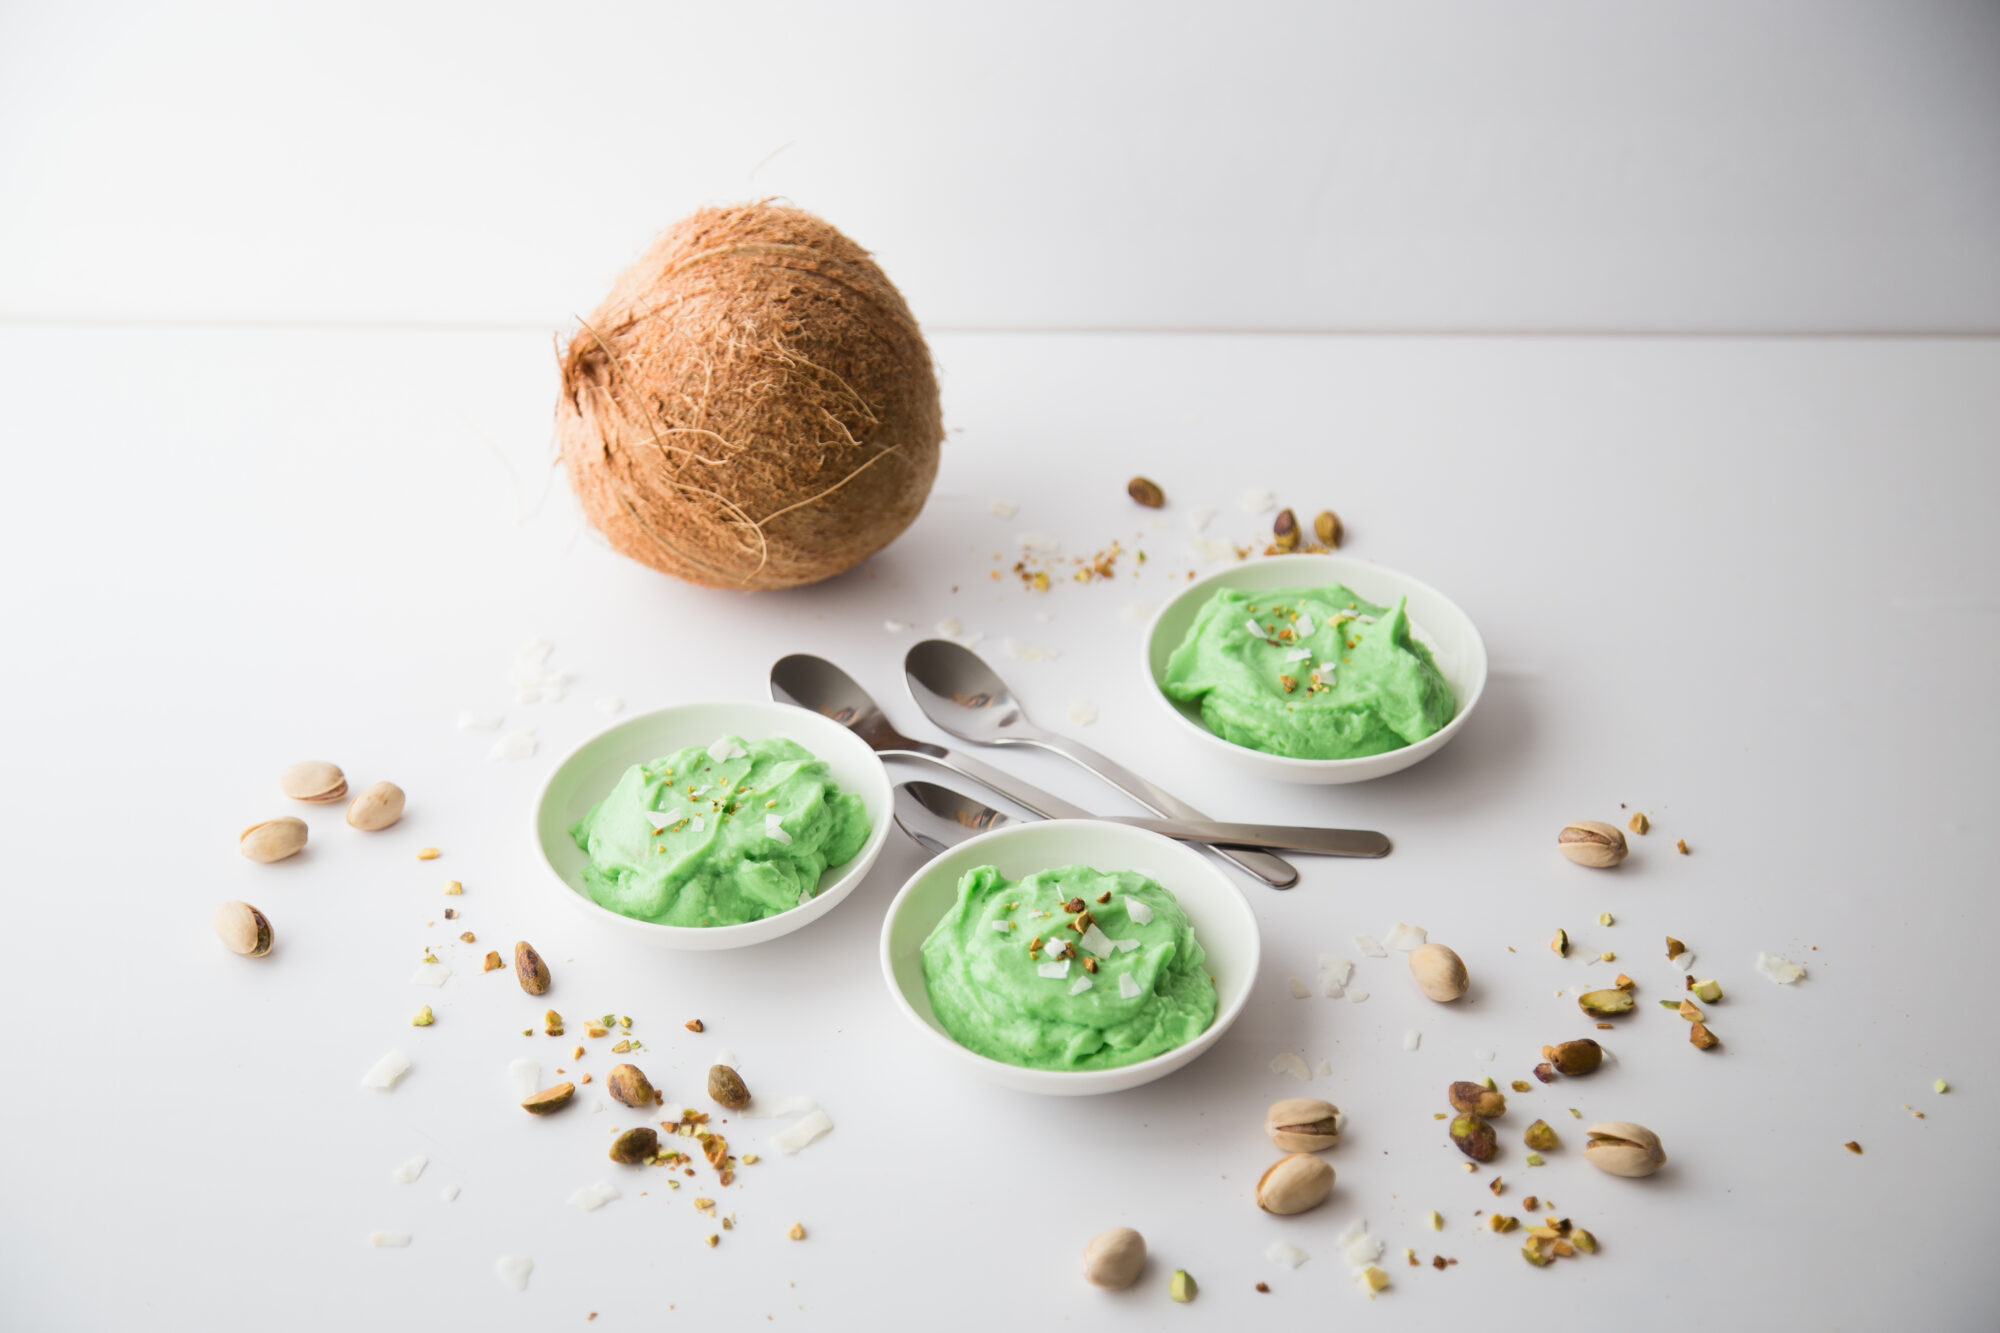 Three bowls filled with green pistachio pudding, topped with crushed pistachios, surrounded by three spoons, a coconut and more crushed pistachios.